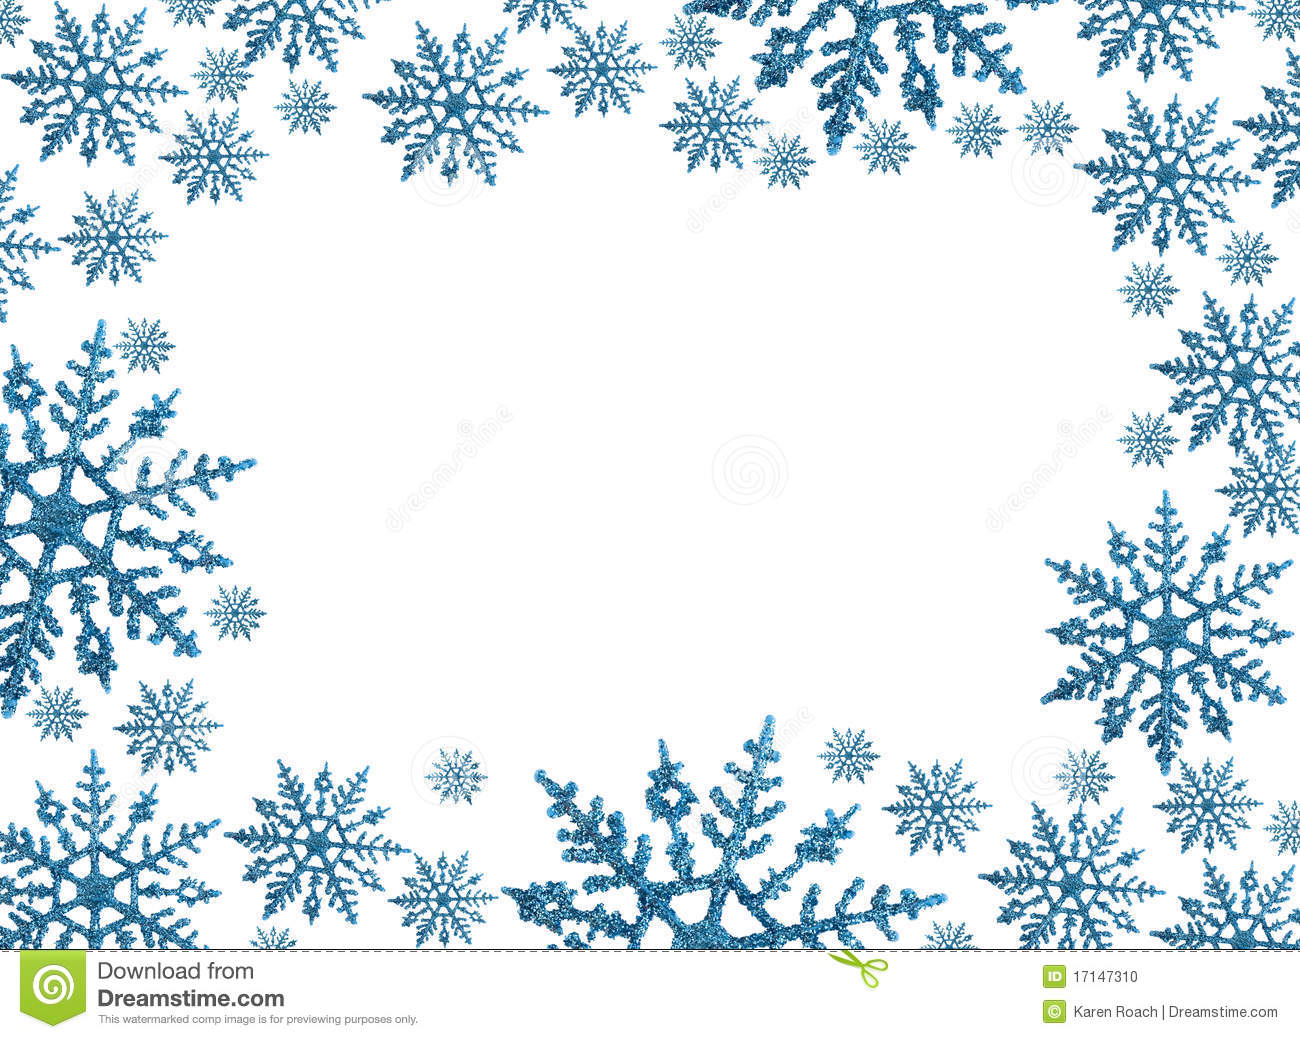 january-border-and-frame-clipart-clipground